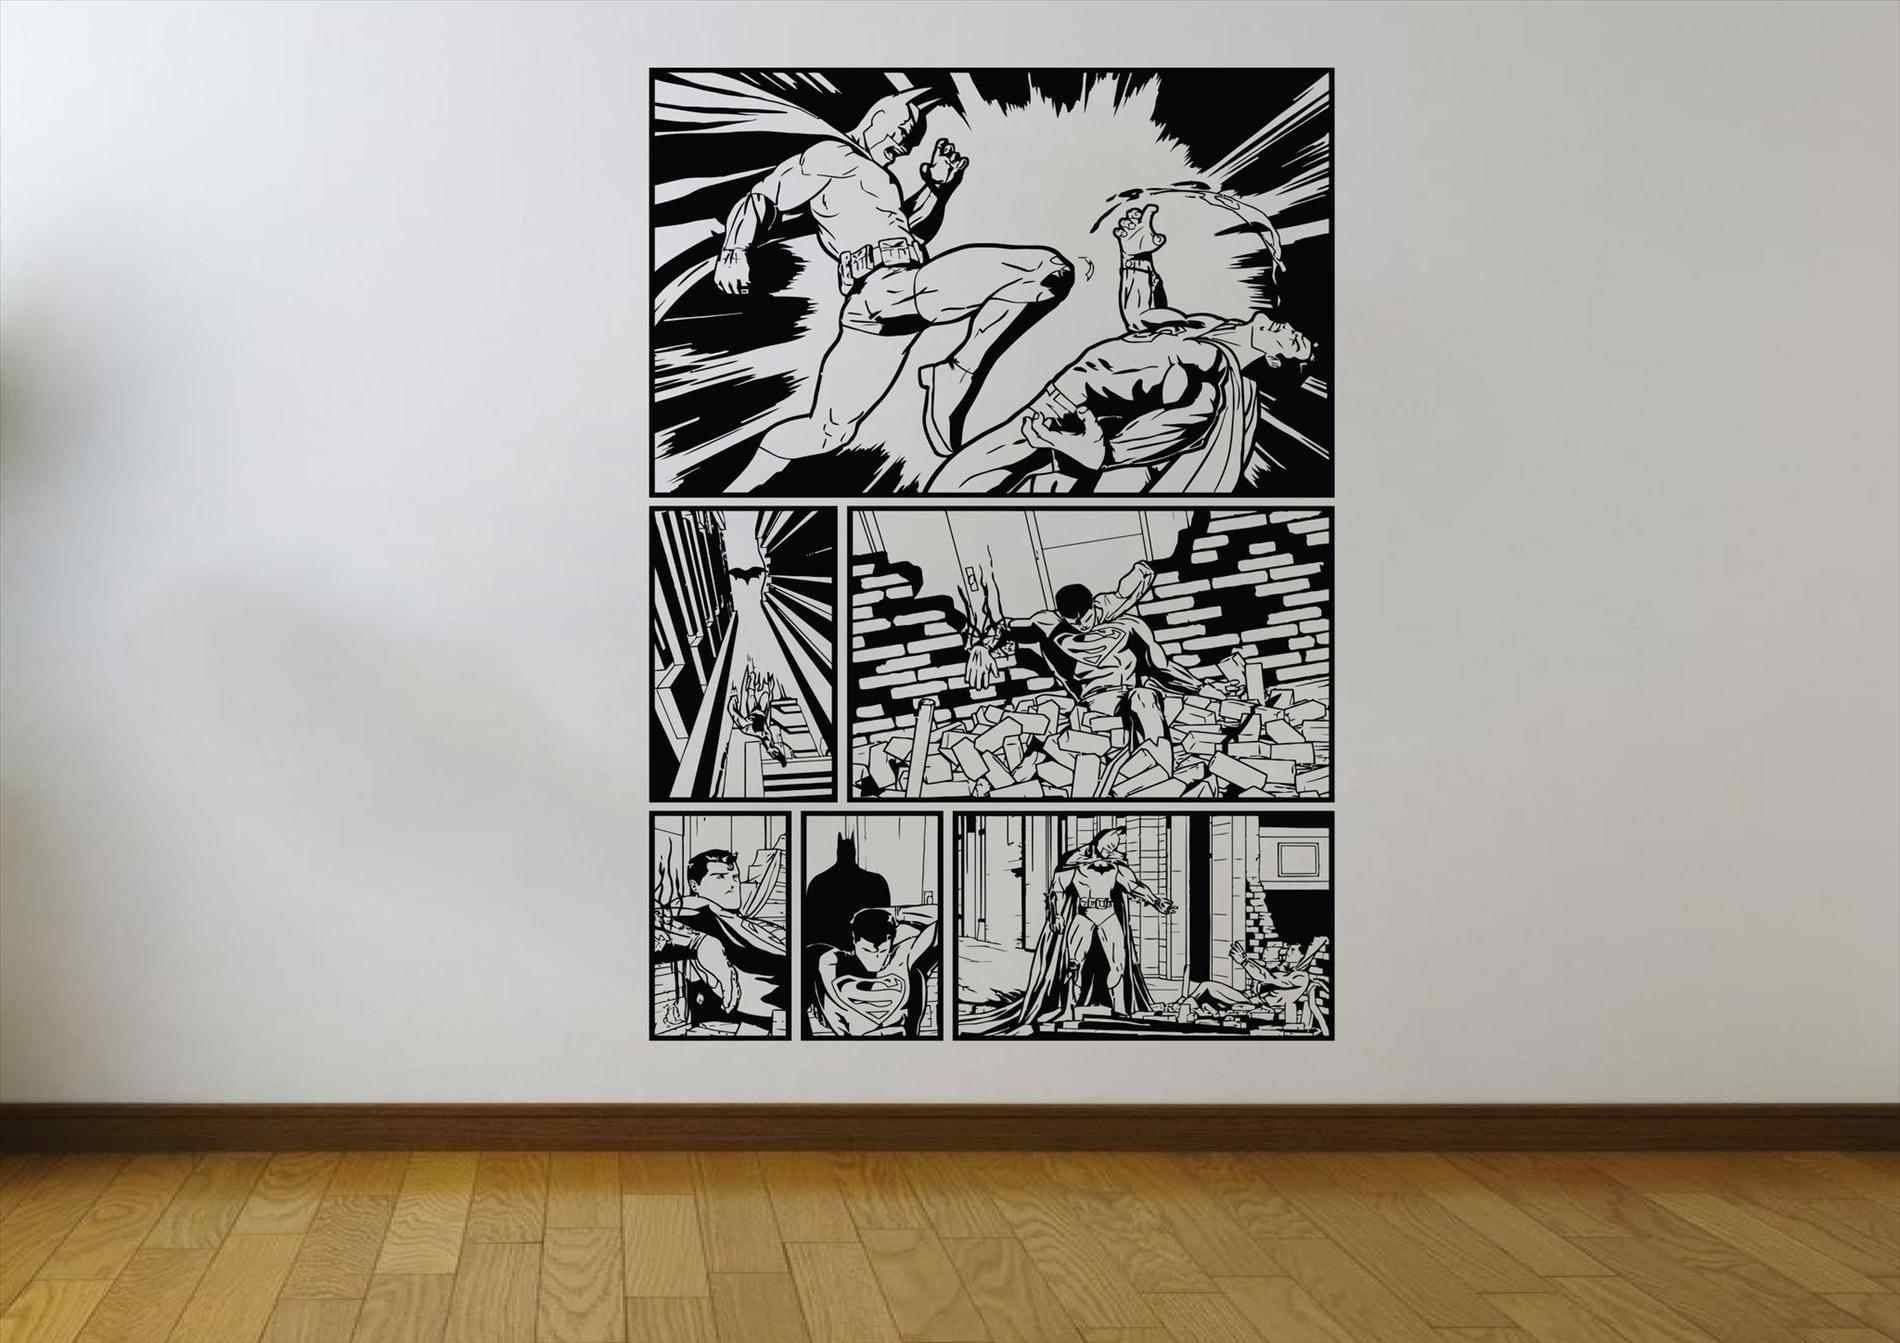 Superman Page Panel Wall Art Stickers Vinyl Decal Samurai Warriors Throughout Most Popular Japanese Wall Art Panels (View 7 of 25)